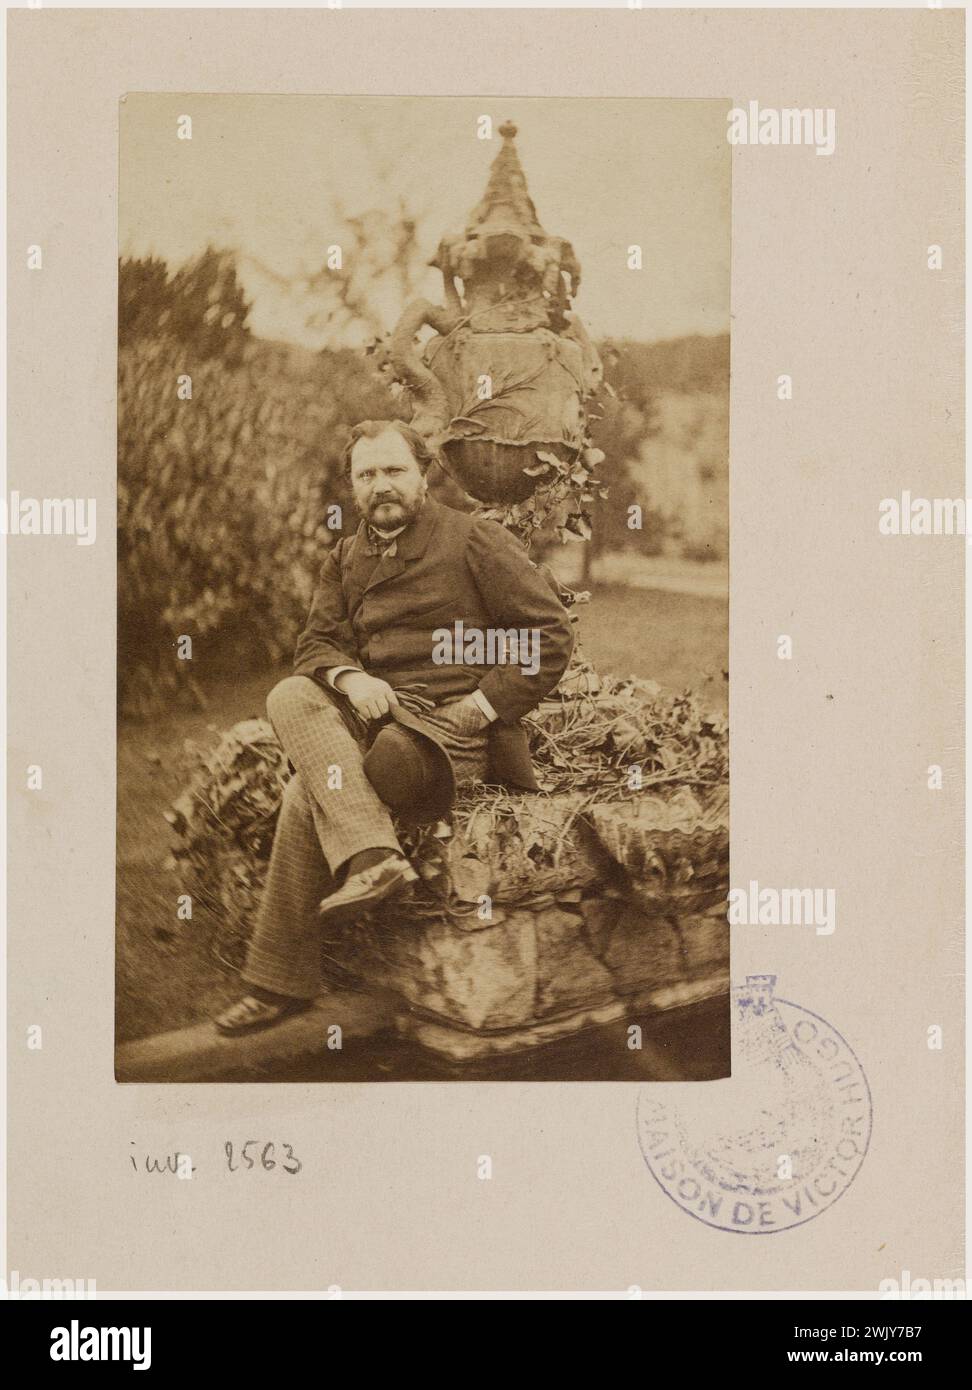 Paul Chenay seated on the edge of the snake fountain in the garden of Hauteville House '. Photography of Edmond Bacot (1814-1875). Draw on albumin paper. 1862. Paris, Maison de Victor Hugo. 101615-15 19th XIXth XIX 19th 19th 19th century Stock Photo